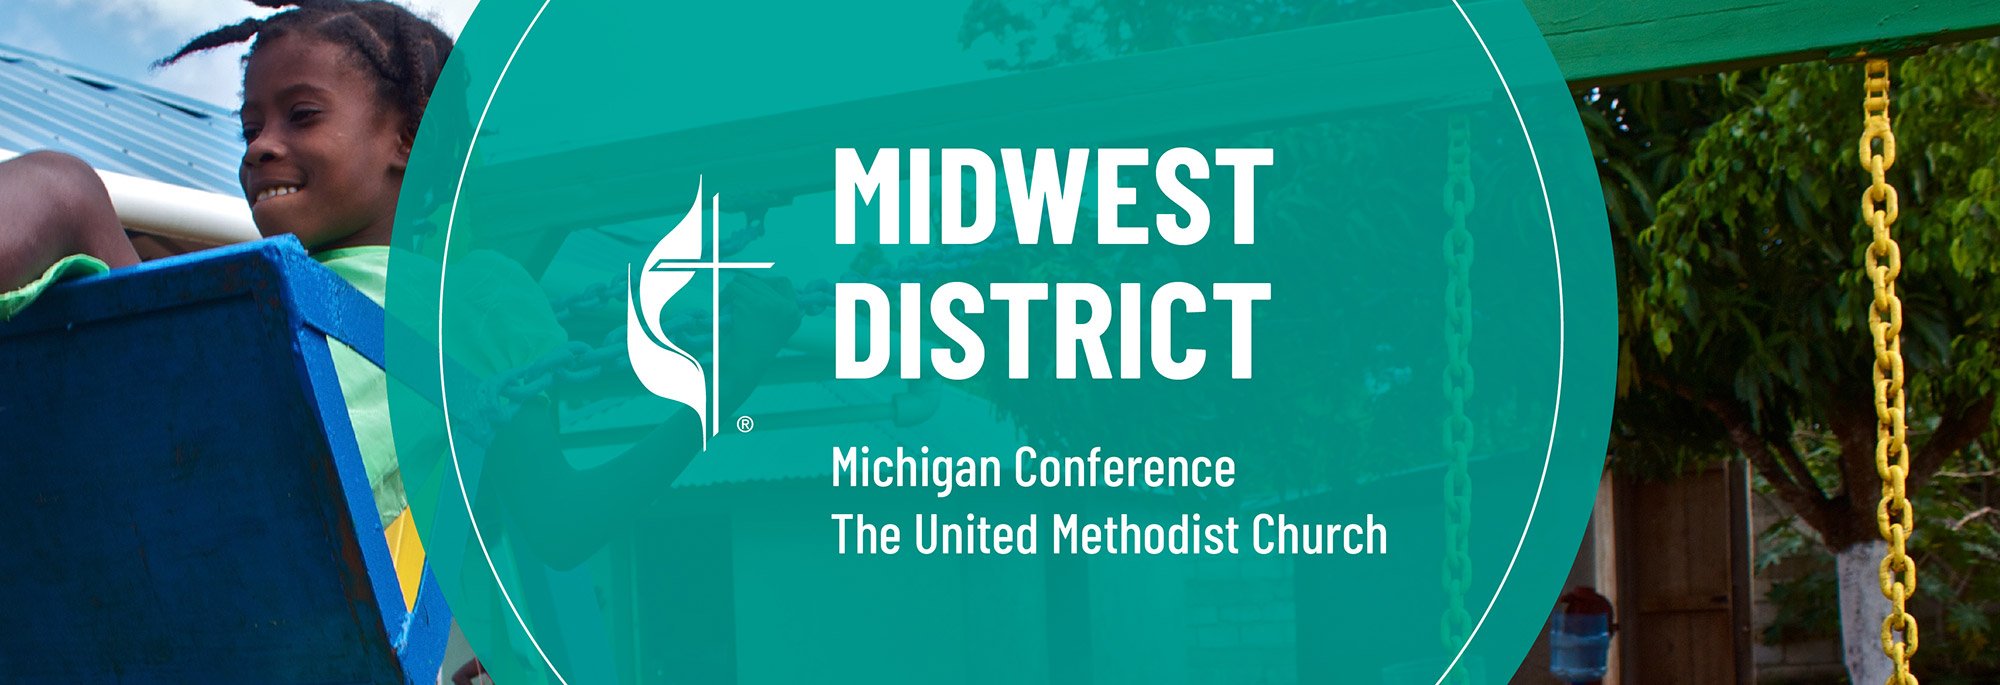 Midwest District Logo